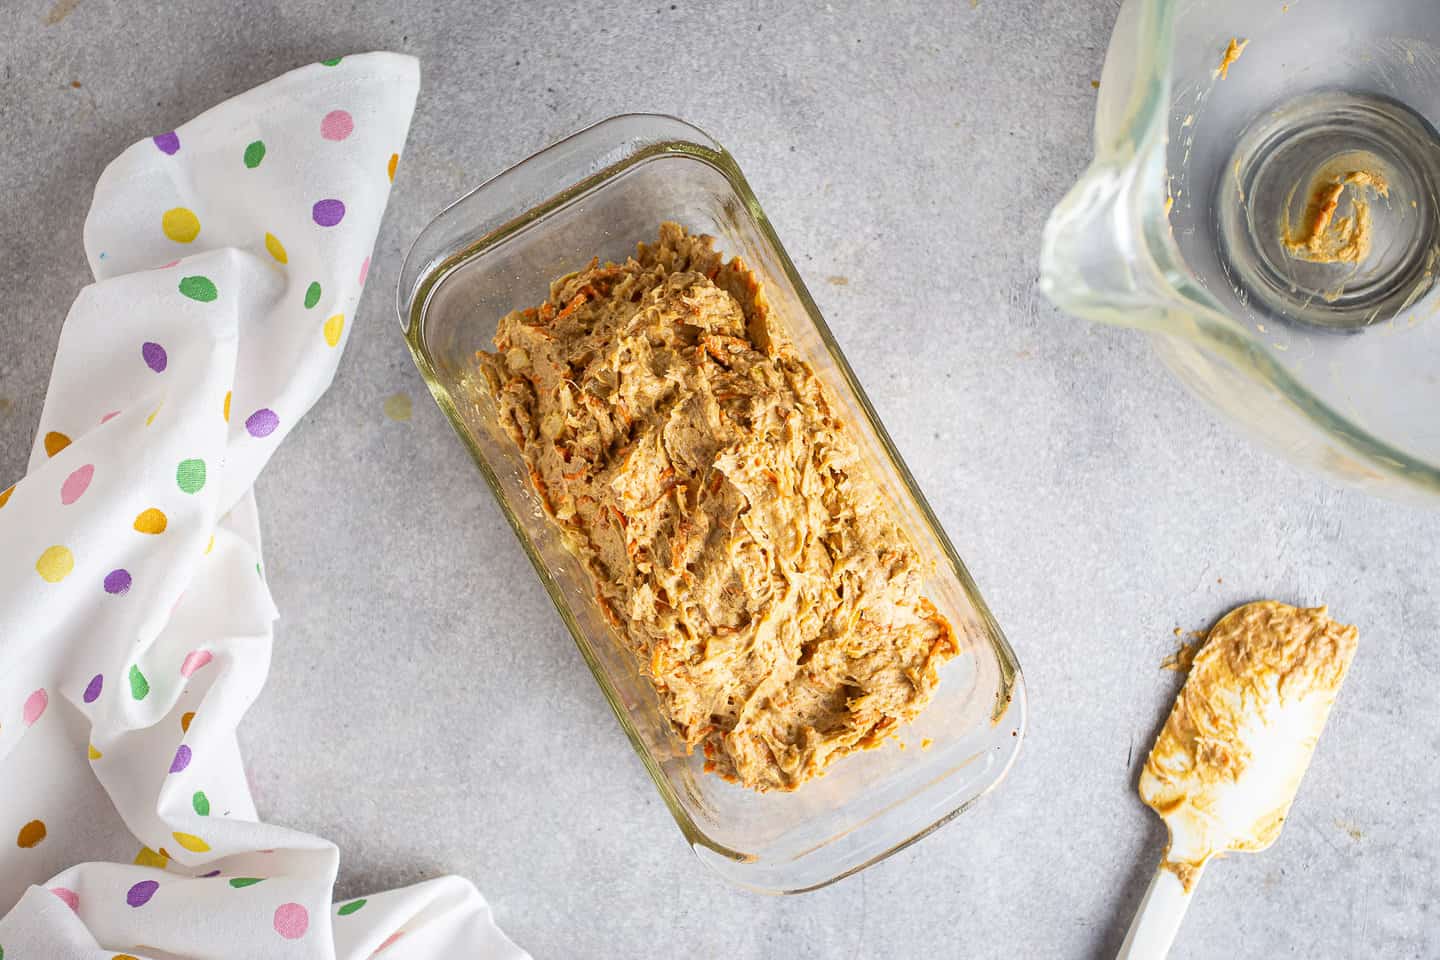 Carrot cake batter in a glass loaf pan.